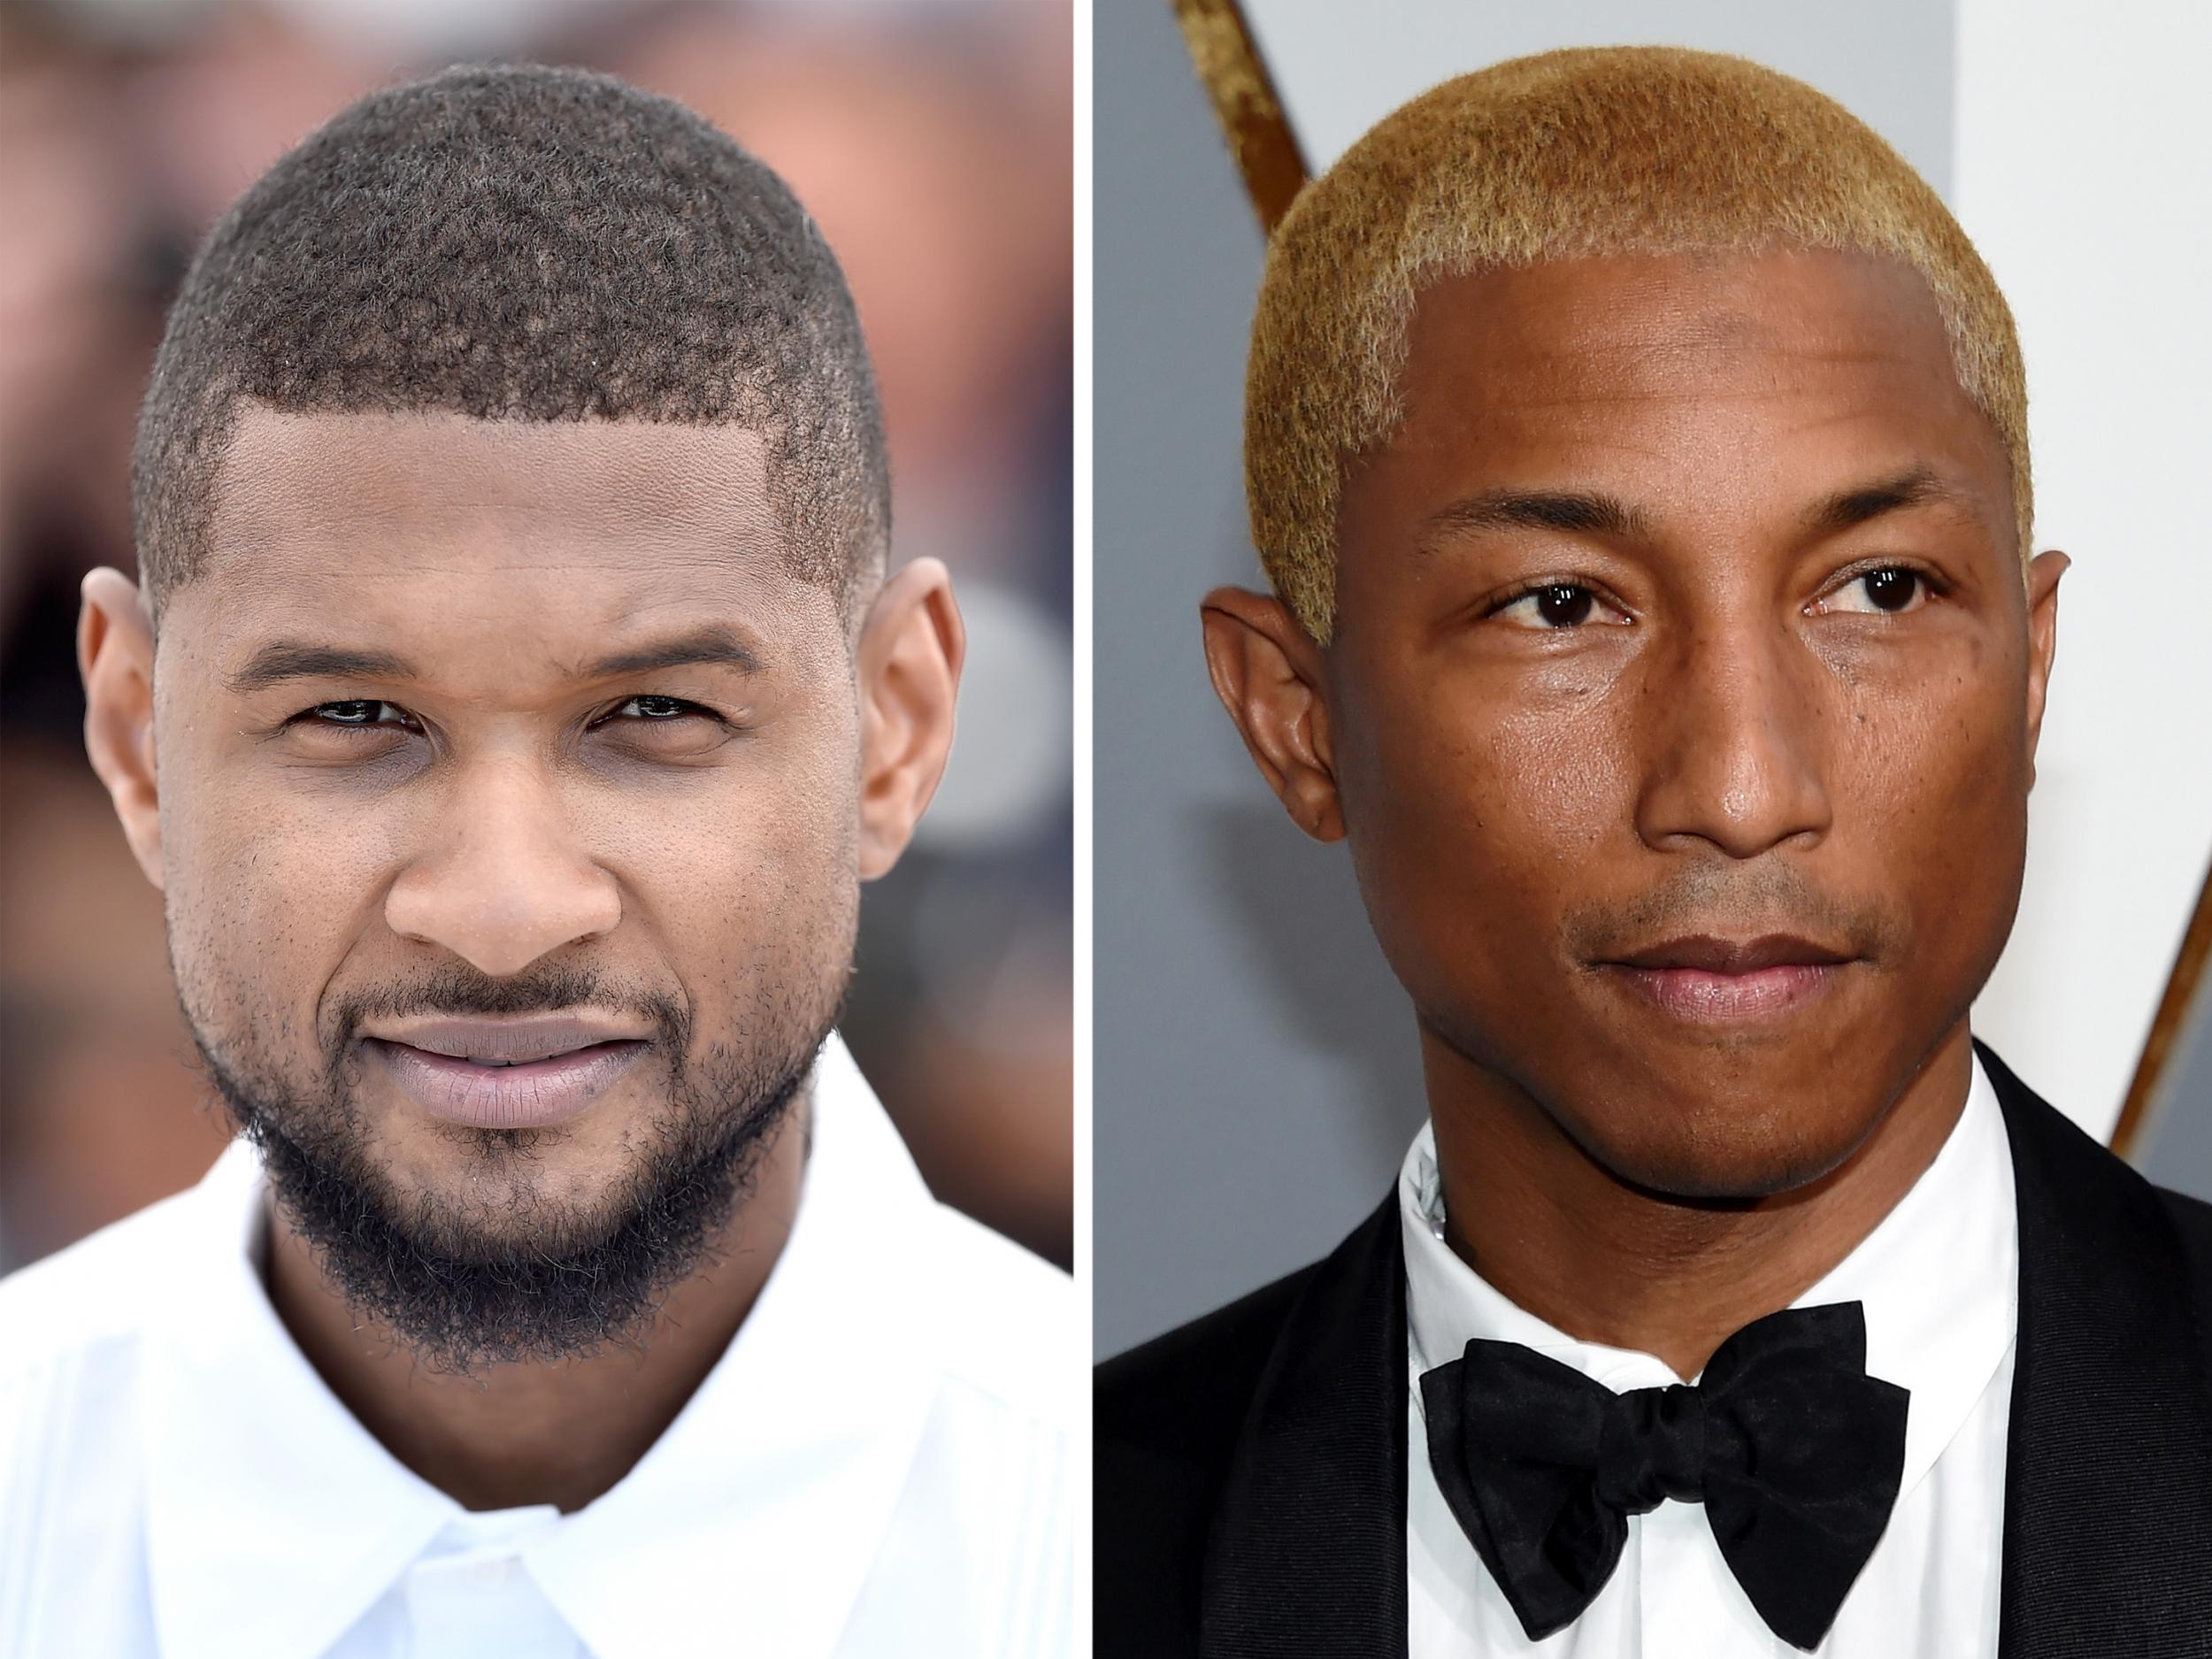 Usher and Pharrell Williams have both advocated for making Juneteenth a national holiday in the US.